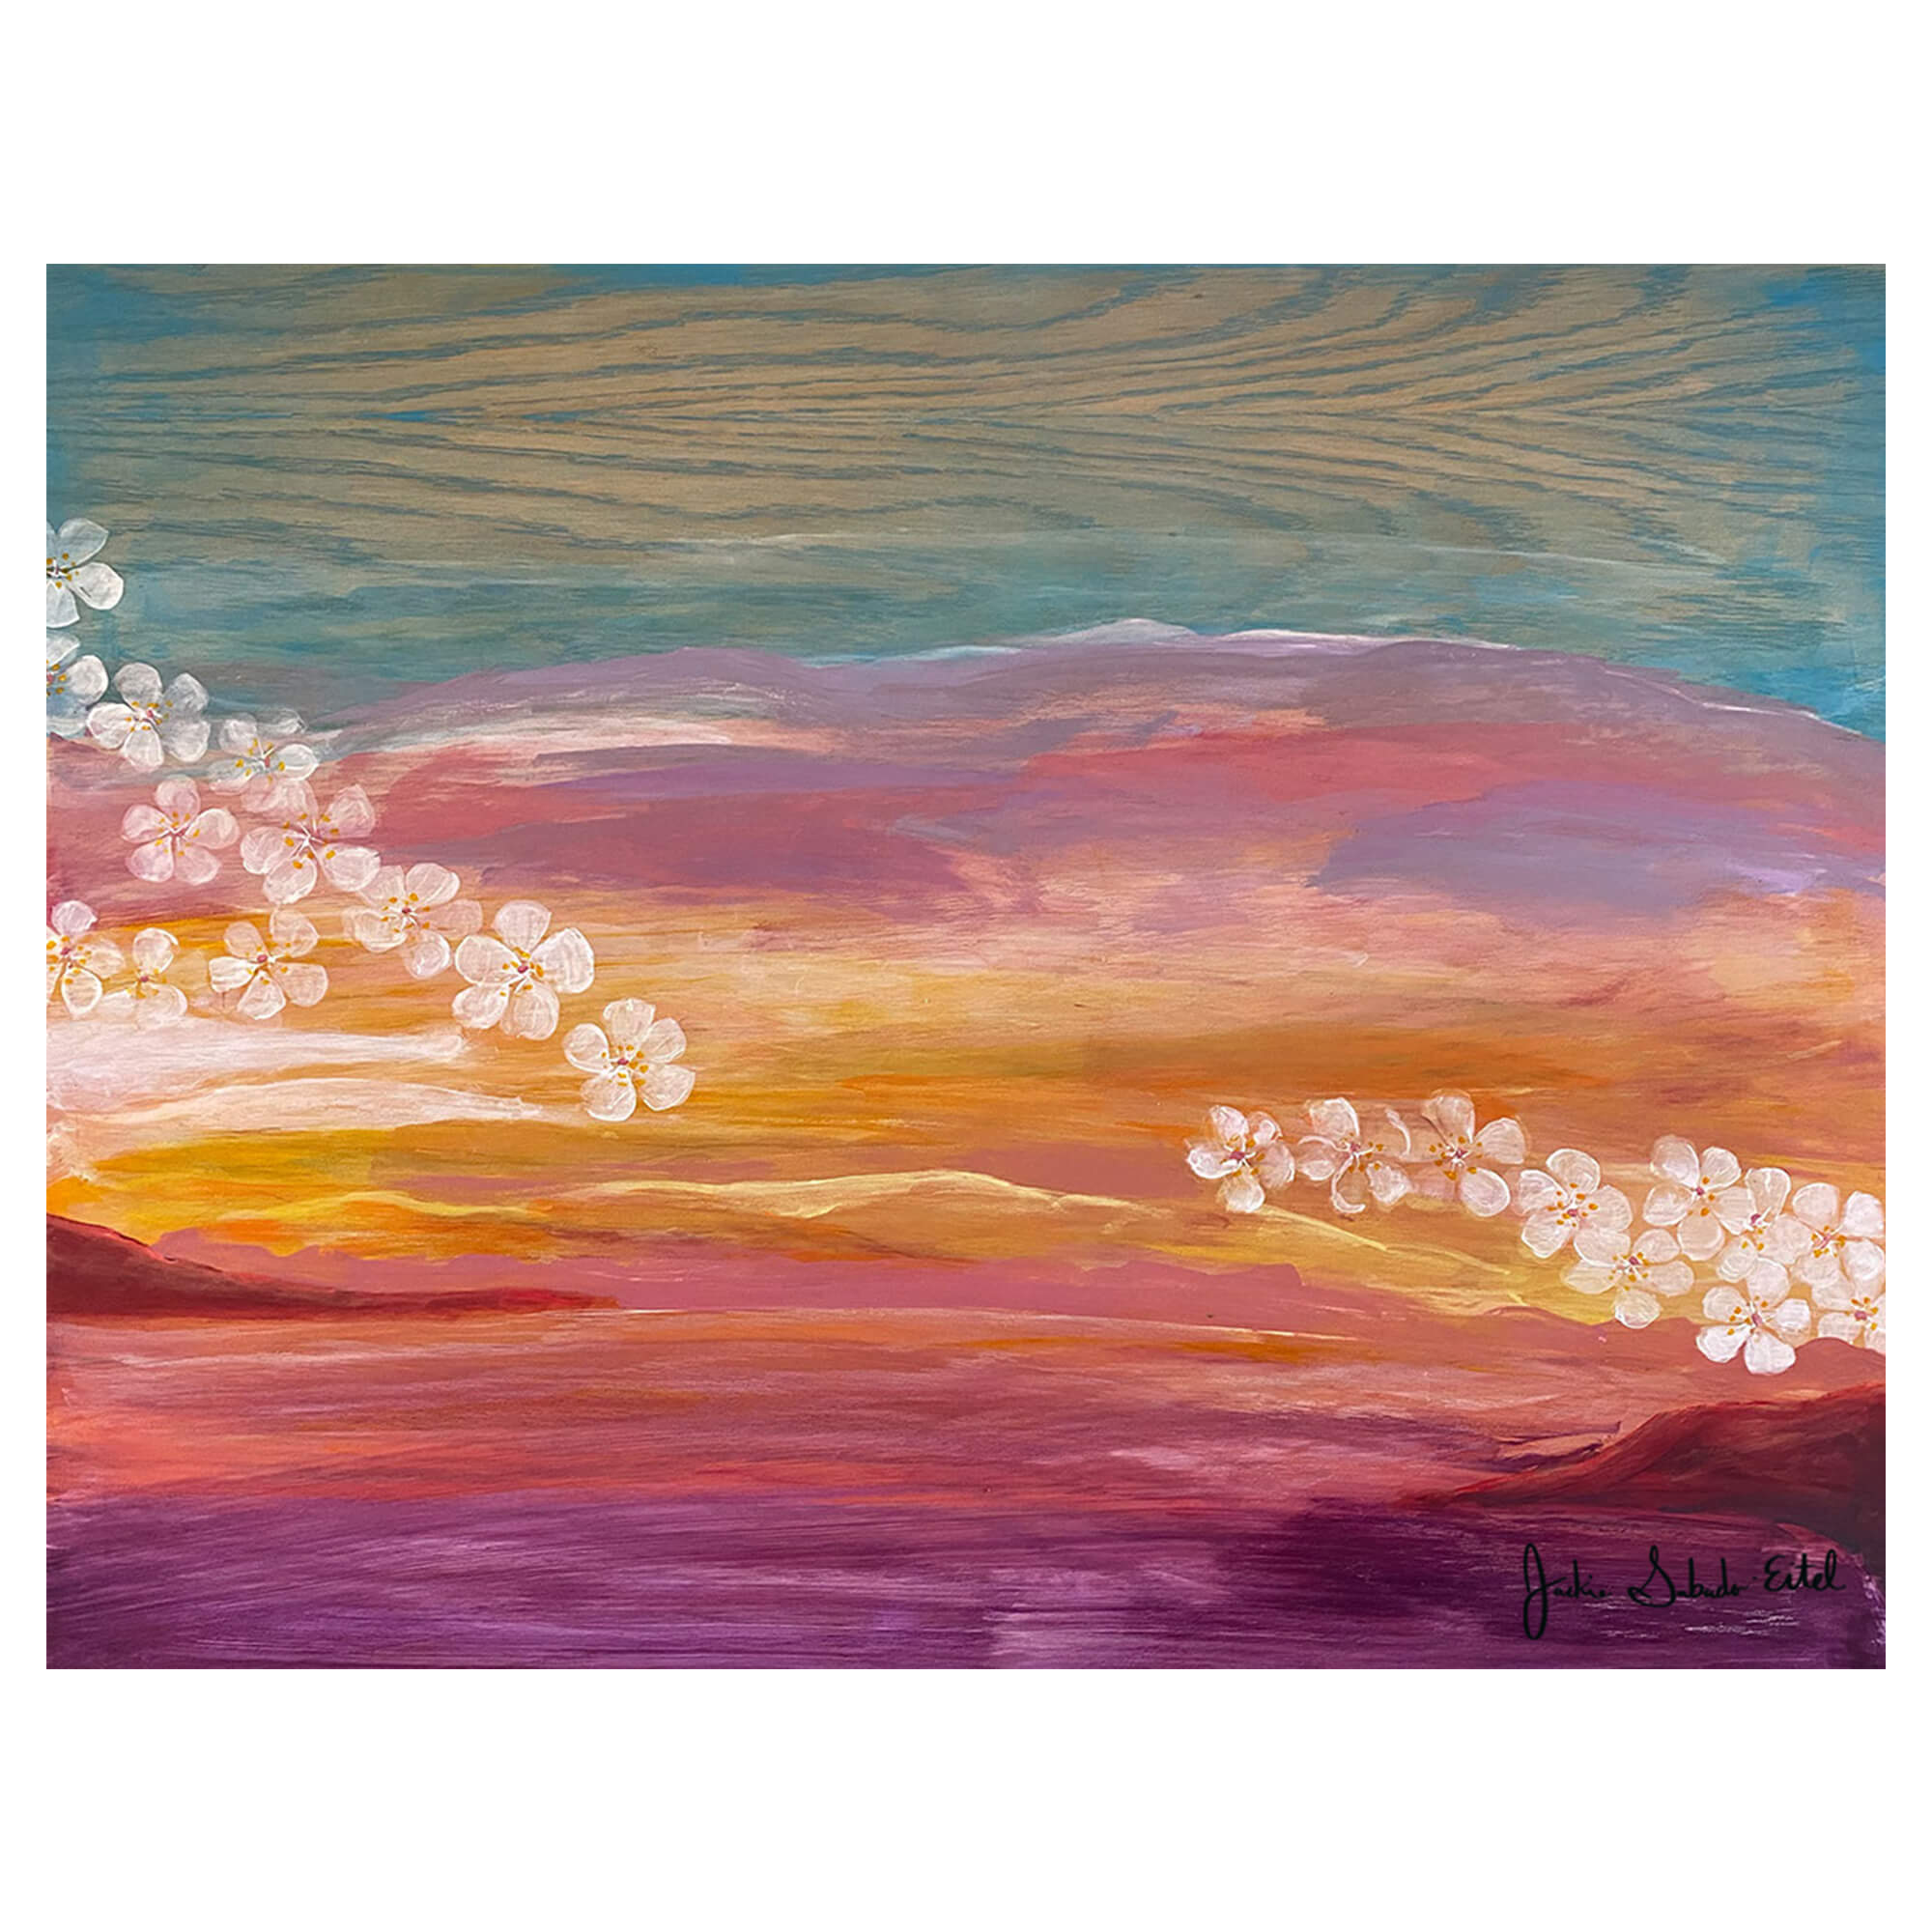 A matted art print featuring a vibrant colorful sunset and plumeria flowers by Hawaii artist Jackie Eitel